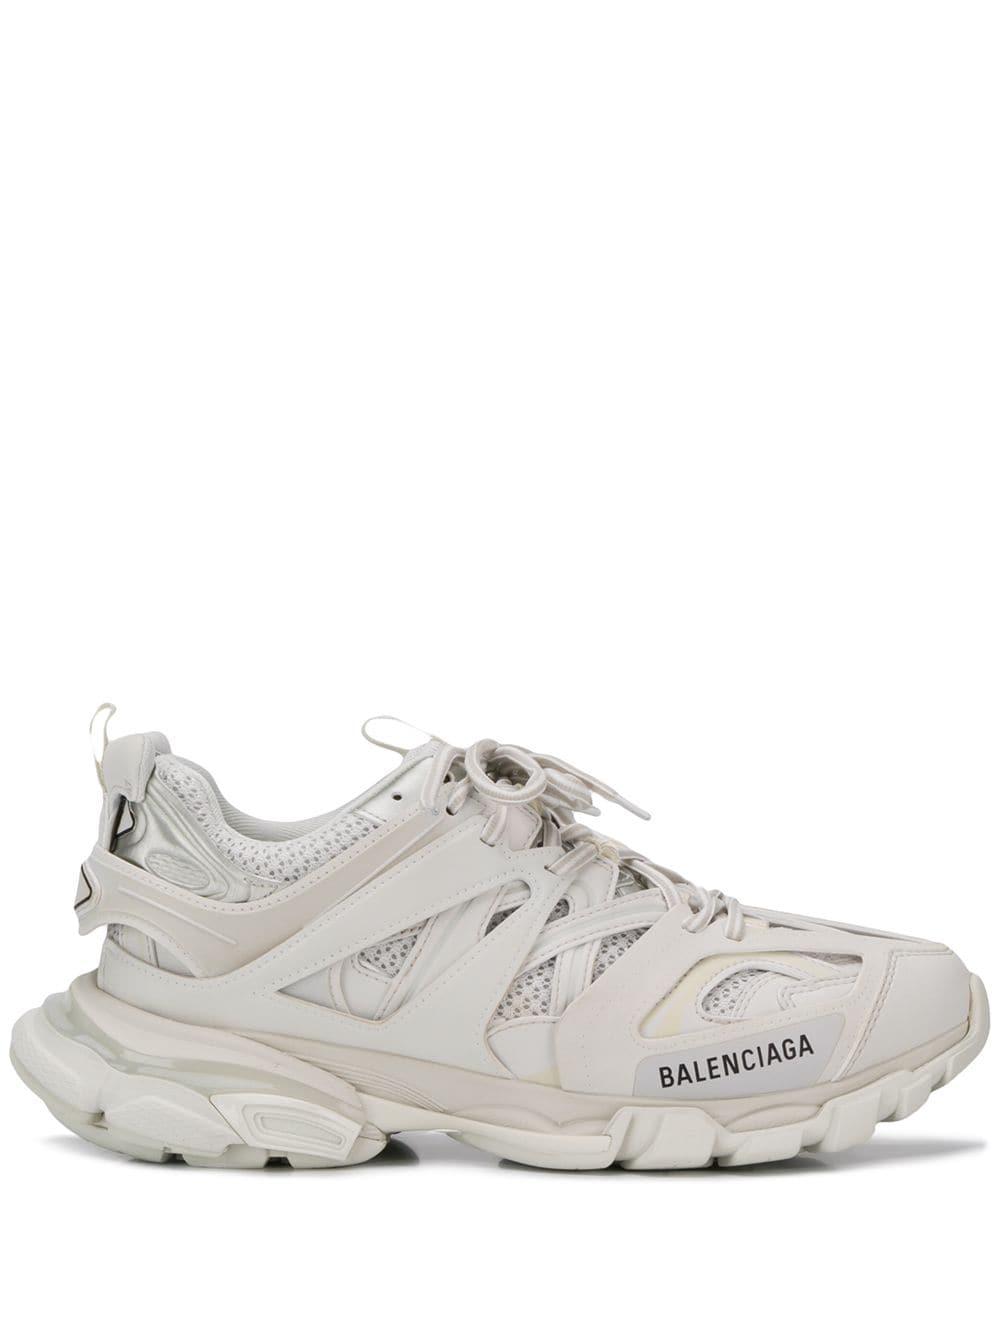 Balenciaga Track Sneakers in White - Save 9% - Lyst